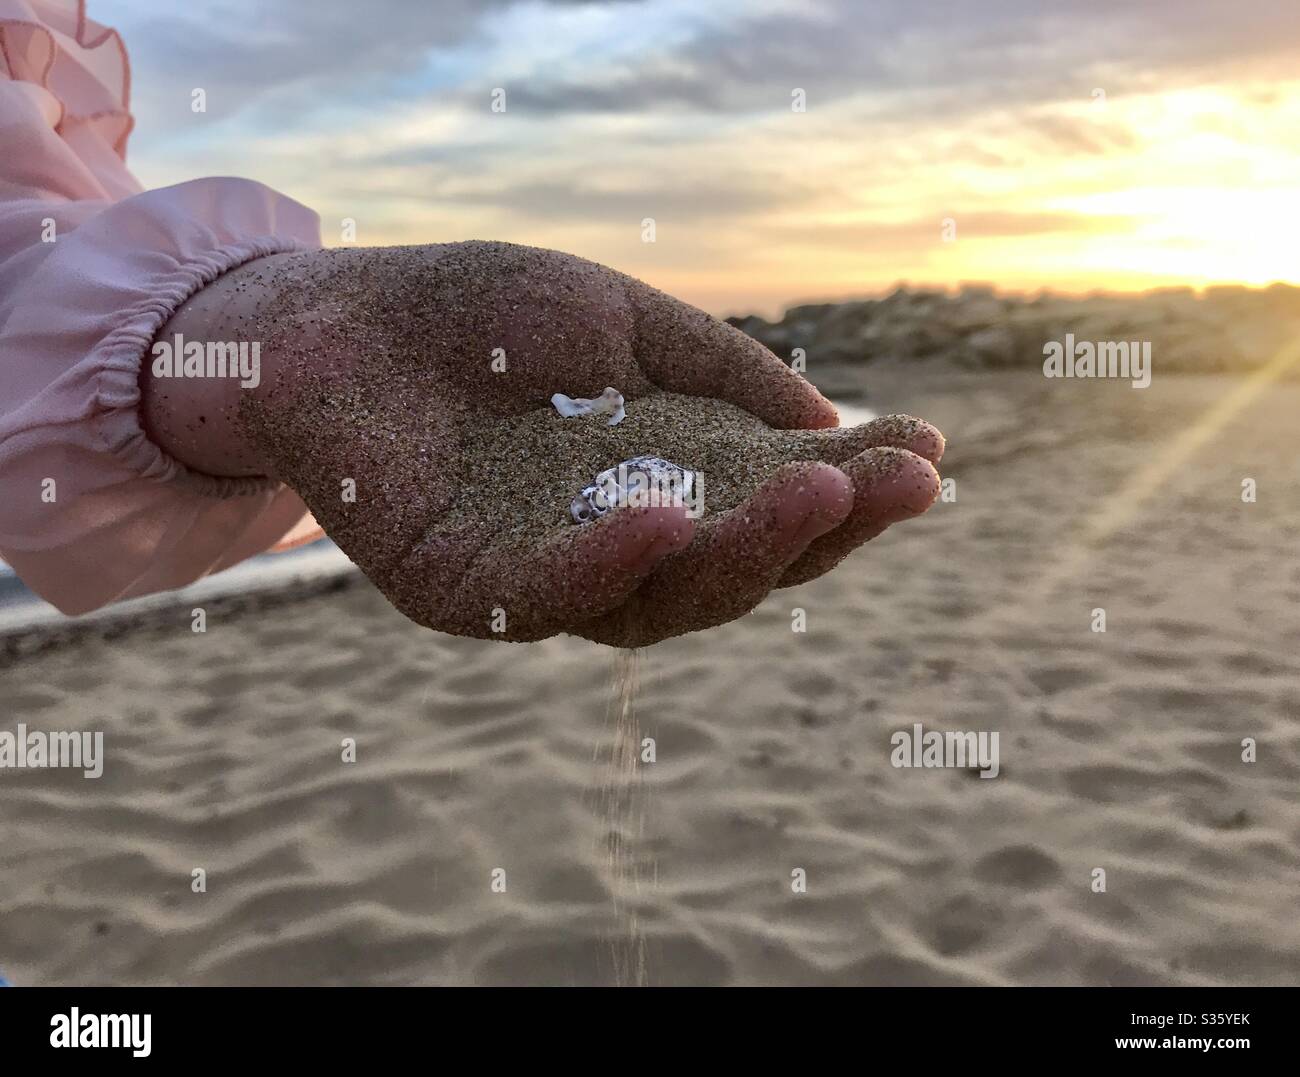 Sand falling down from the child hand Stock Photo